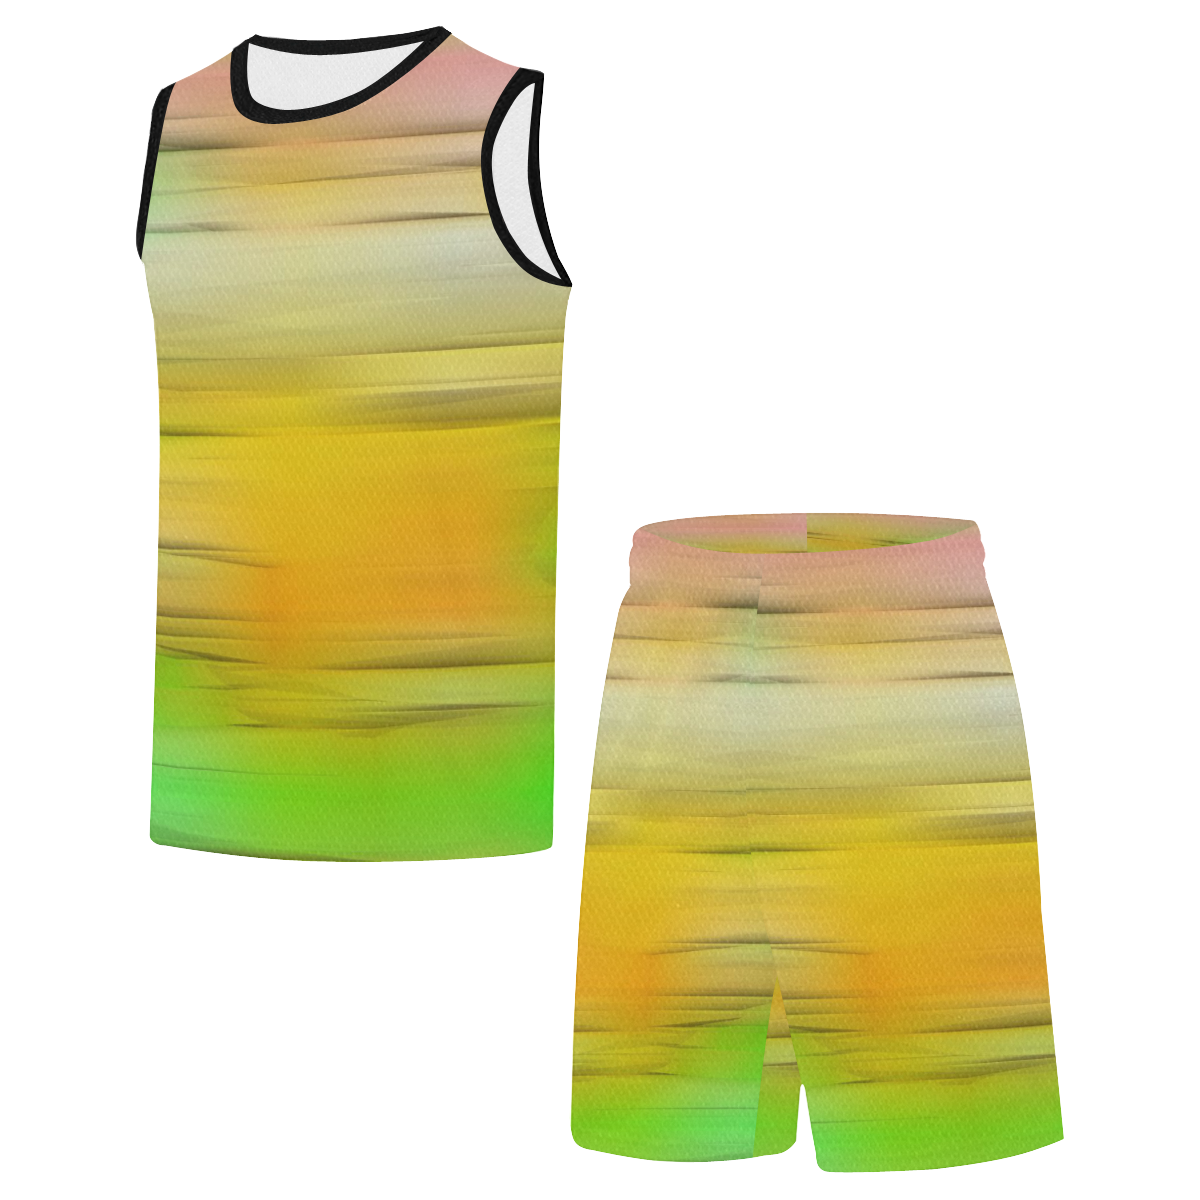 noisy gradient 2 by JamColors All Over Print Basketball Uniform